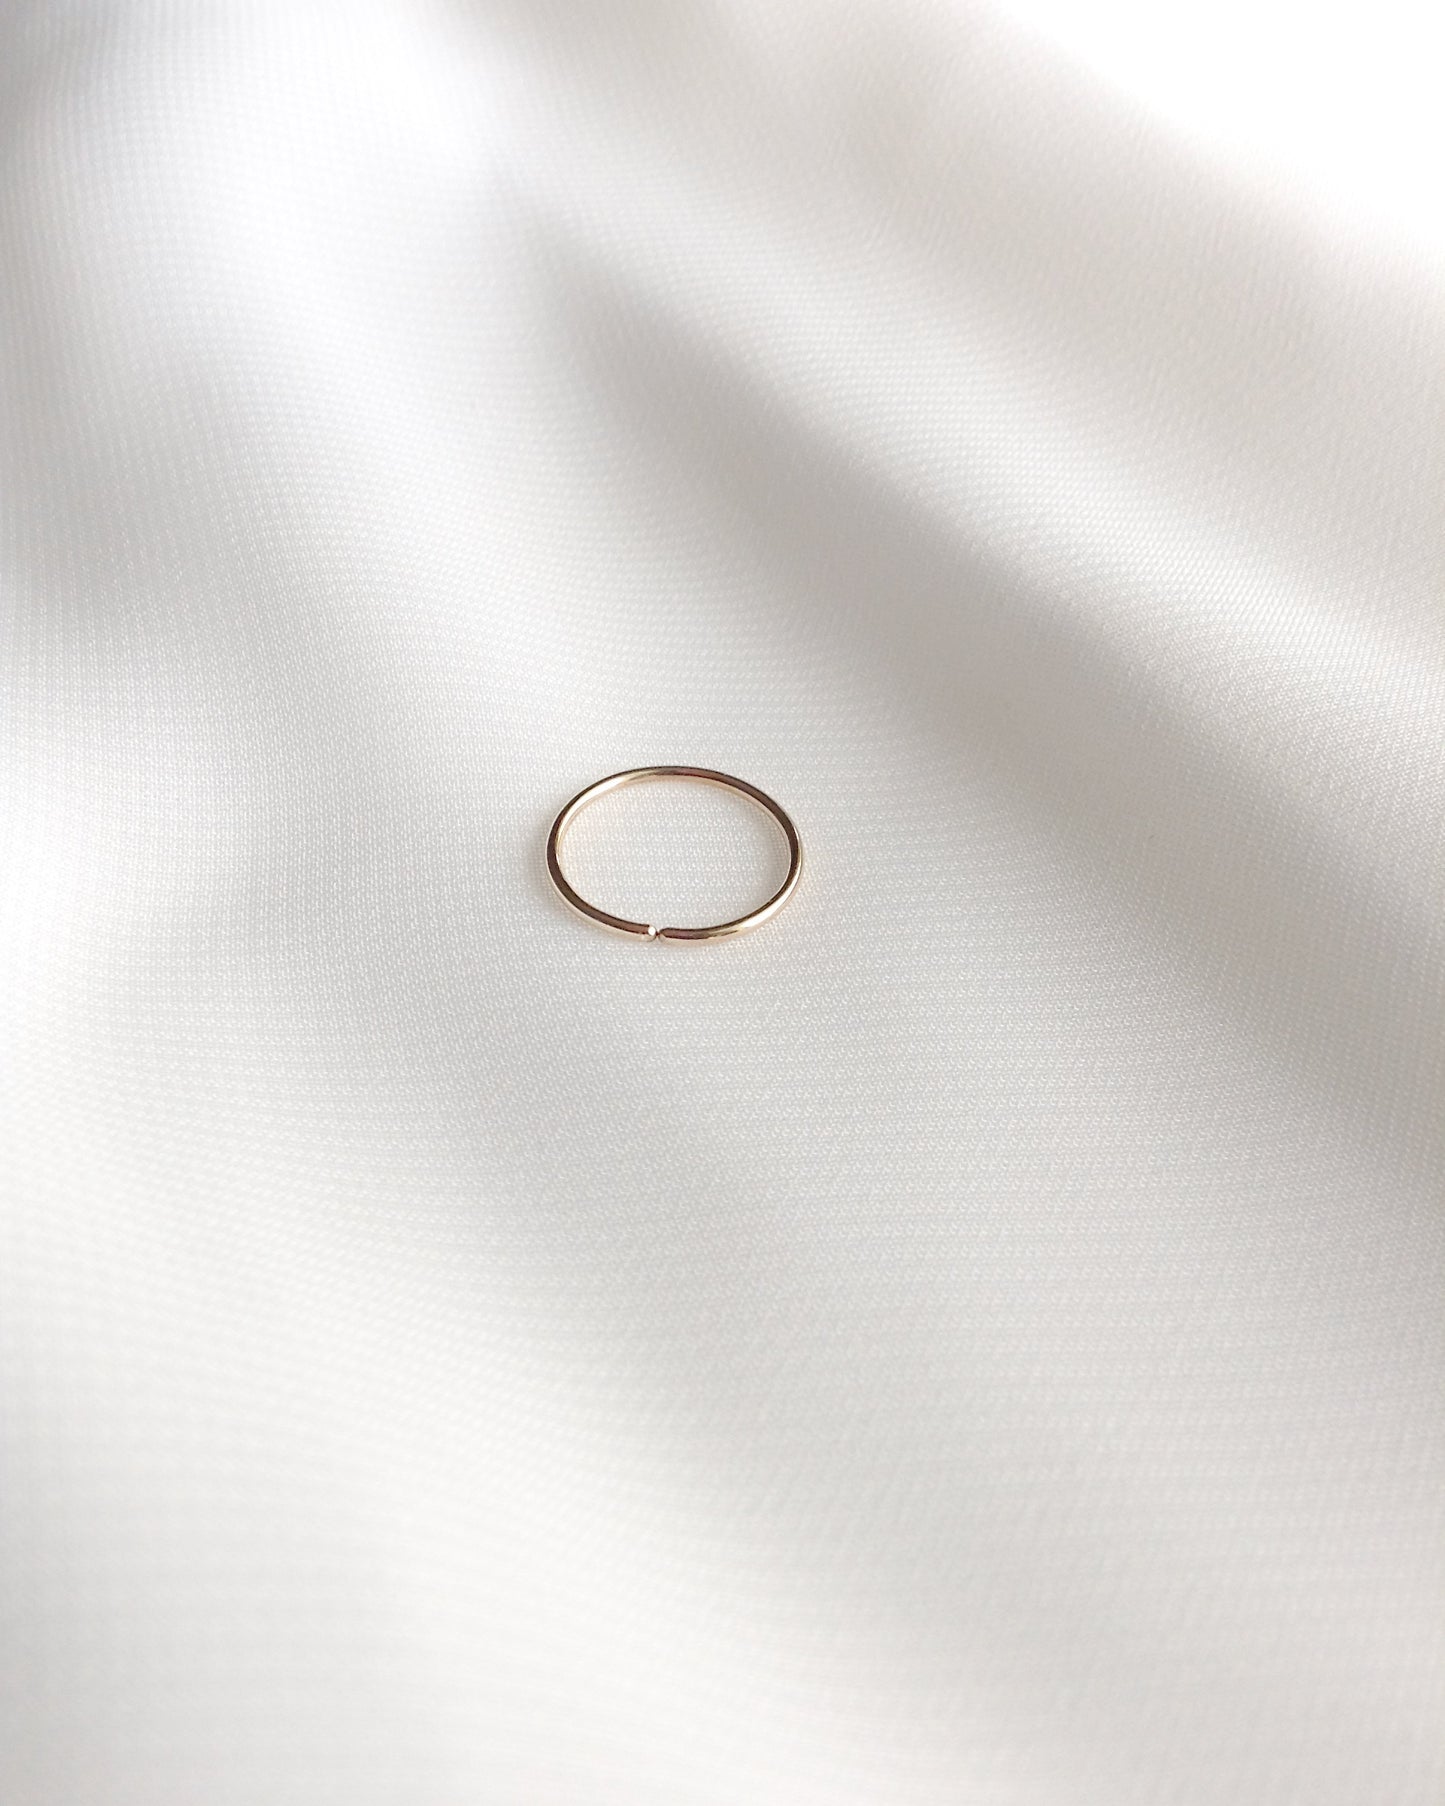 6mm 7mm 8mm 9mm 10mm Simple Gold Filled Cartilage Hoop | Single Cartilage Hoop Earring | Gold Helix Hoop | IB Jewelry